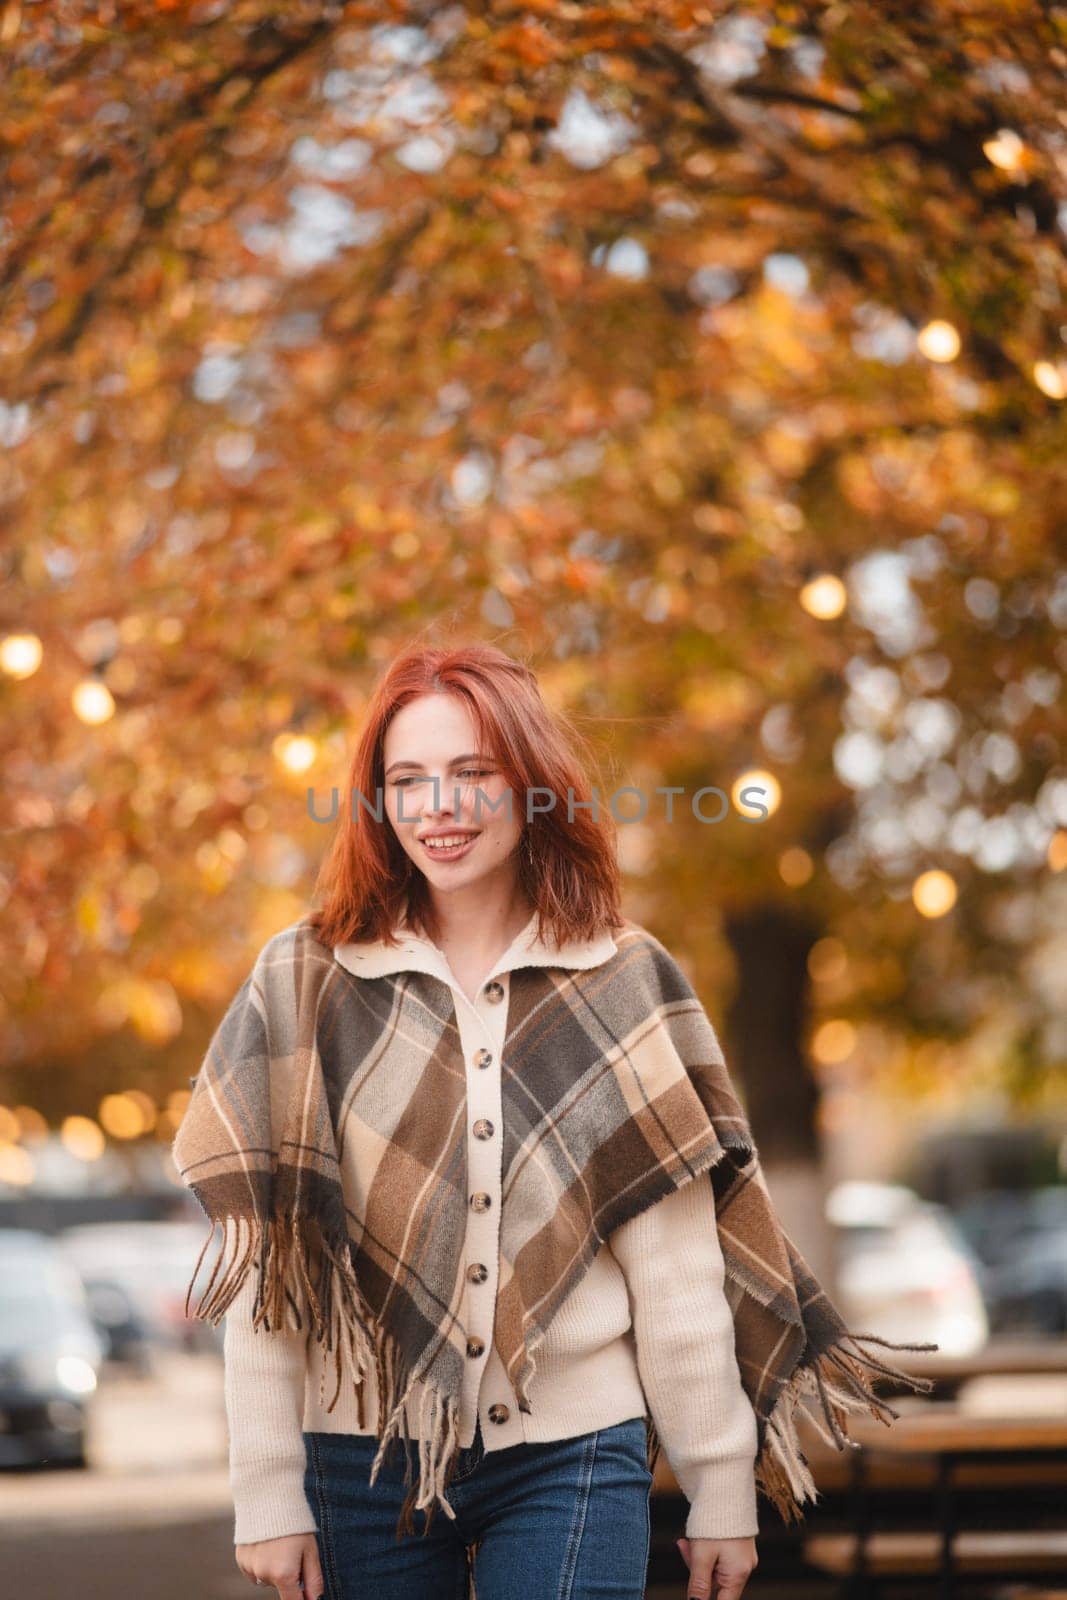 A delightful redhead smiles brightly, adding a touch of happiness to the autumn streets. by teksomolika